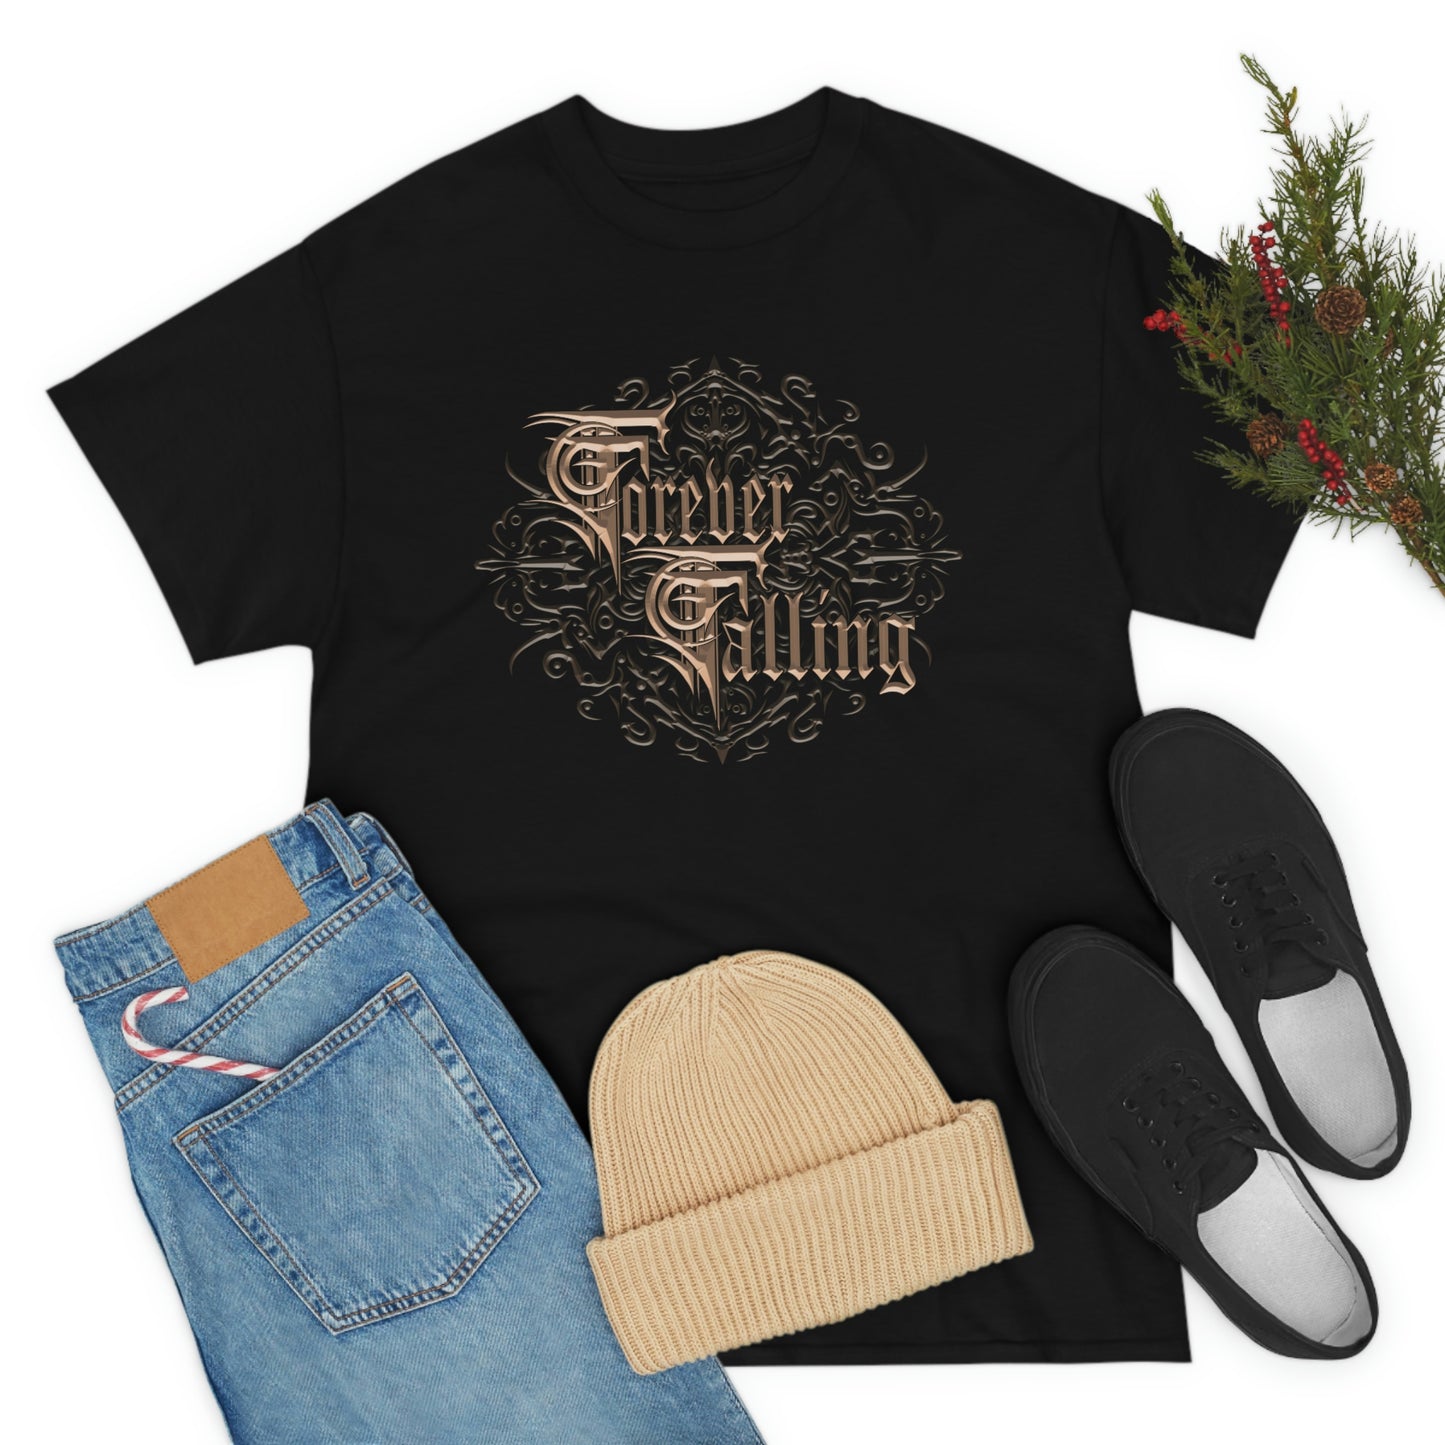 Forever Falling - Cotton Tee